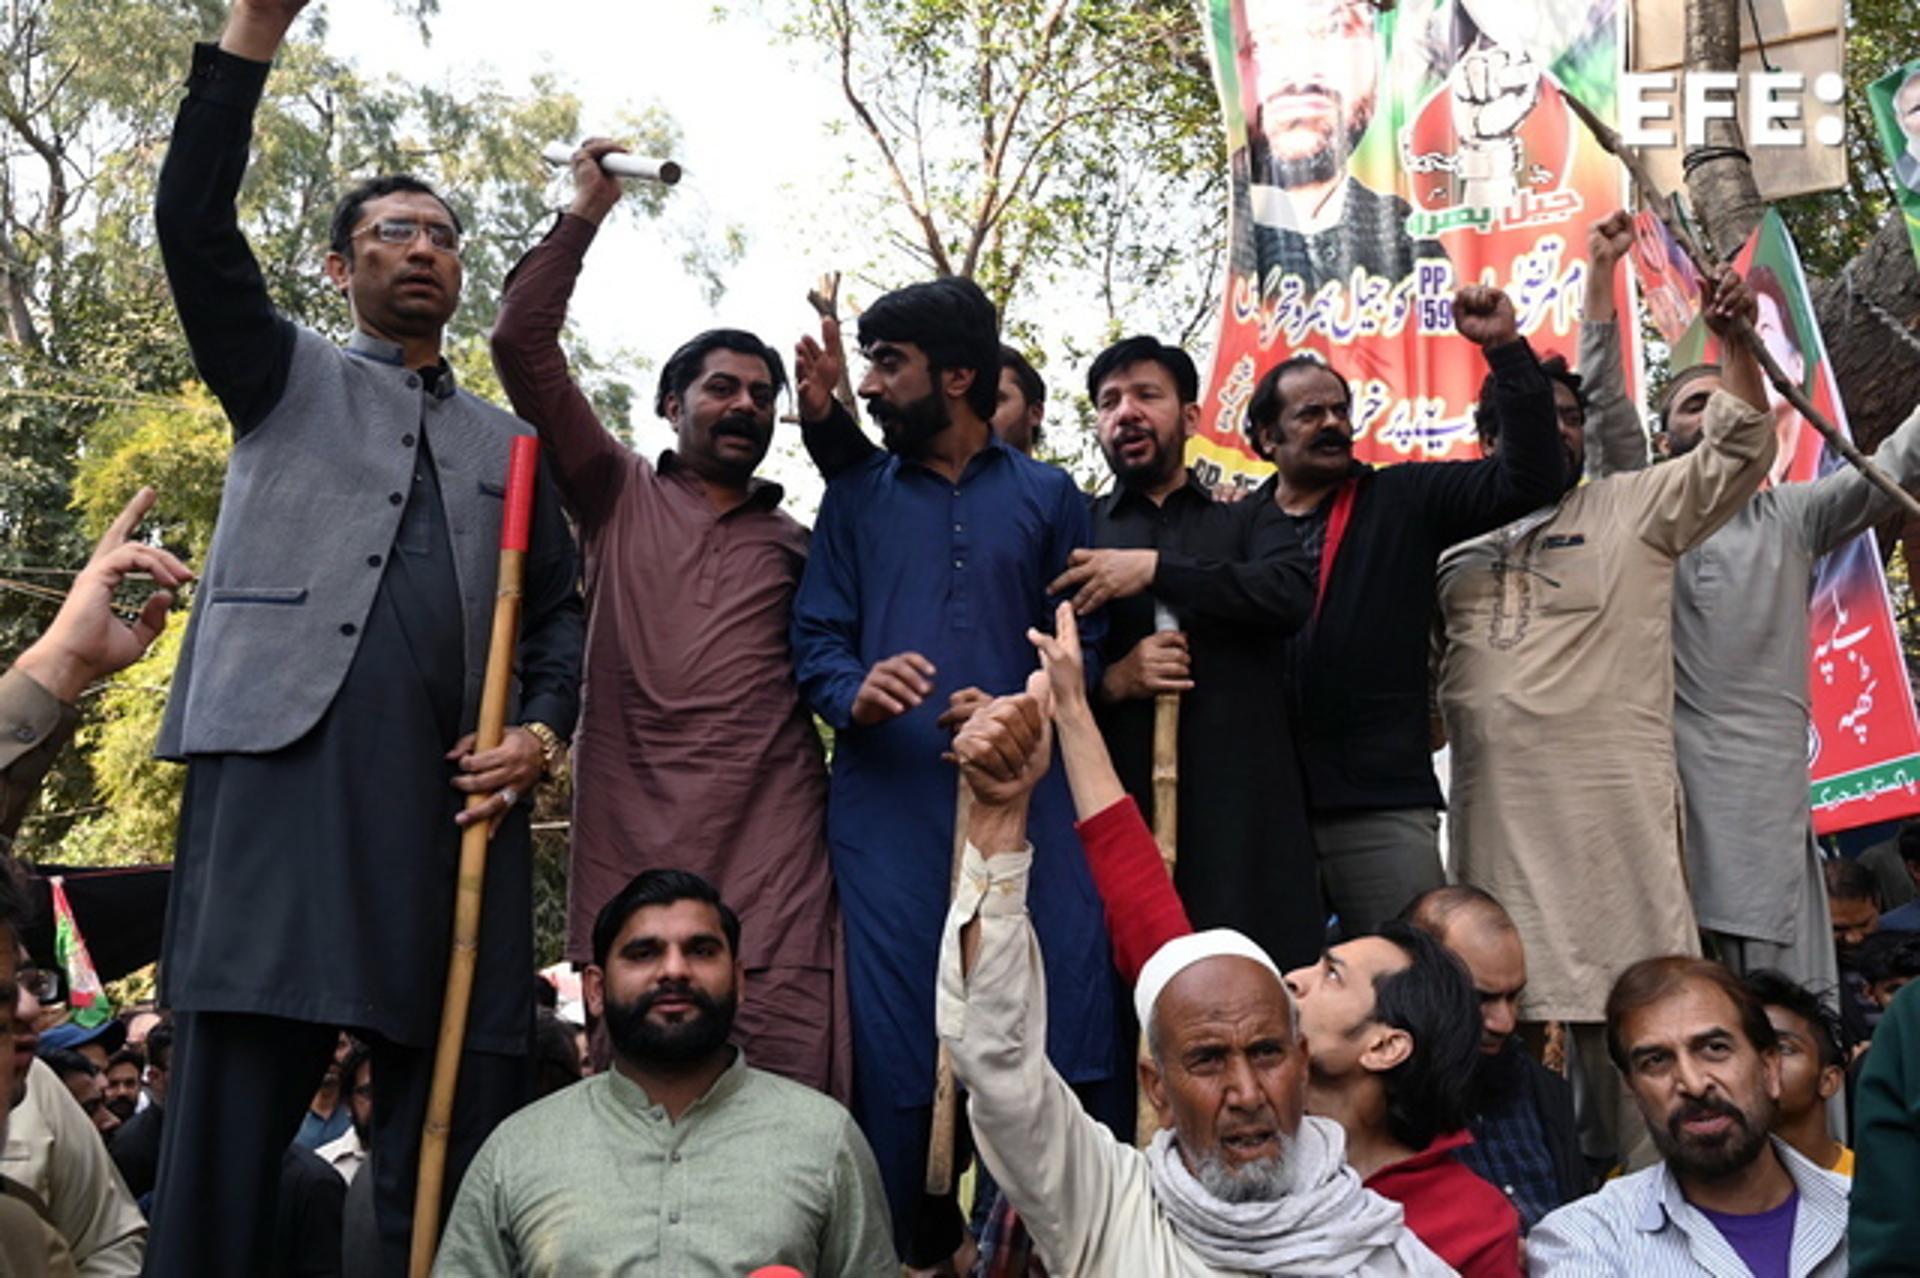 Supporters of former Prime Minister and chairman of opposition party Pakistan Tehrik-e-Insaf, Imran Khan, gather outside his residence as police try to arrest him in a case related to gifts he received from foreign dignitaries while in office, in Lahore, Pakistan, 05 March 2023. EFE-EPA/RAHAT DAR